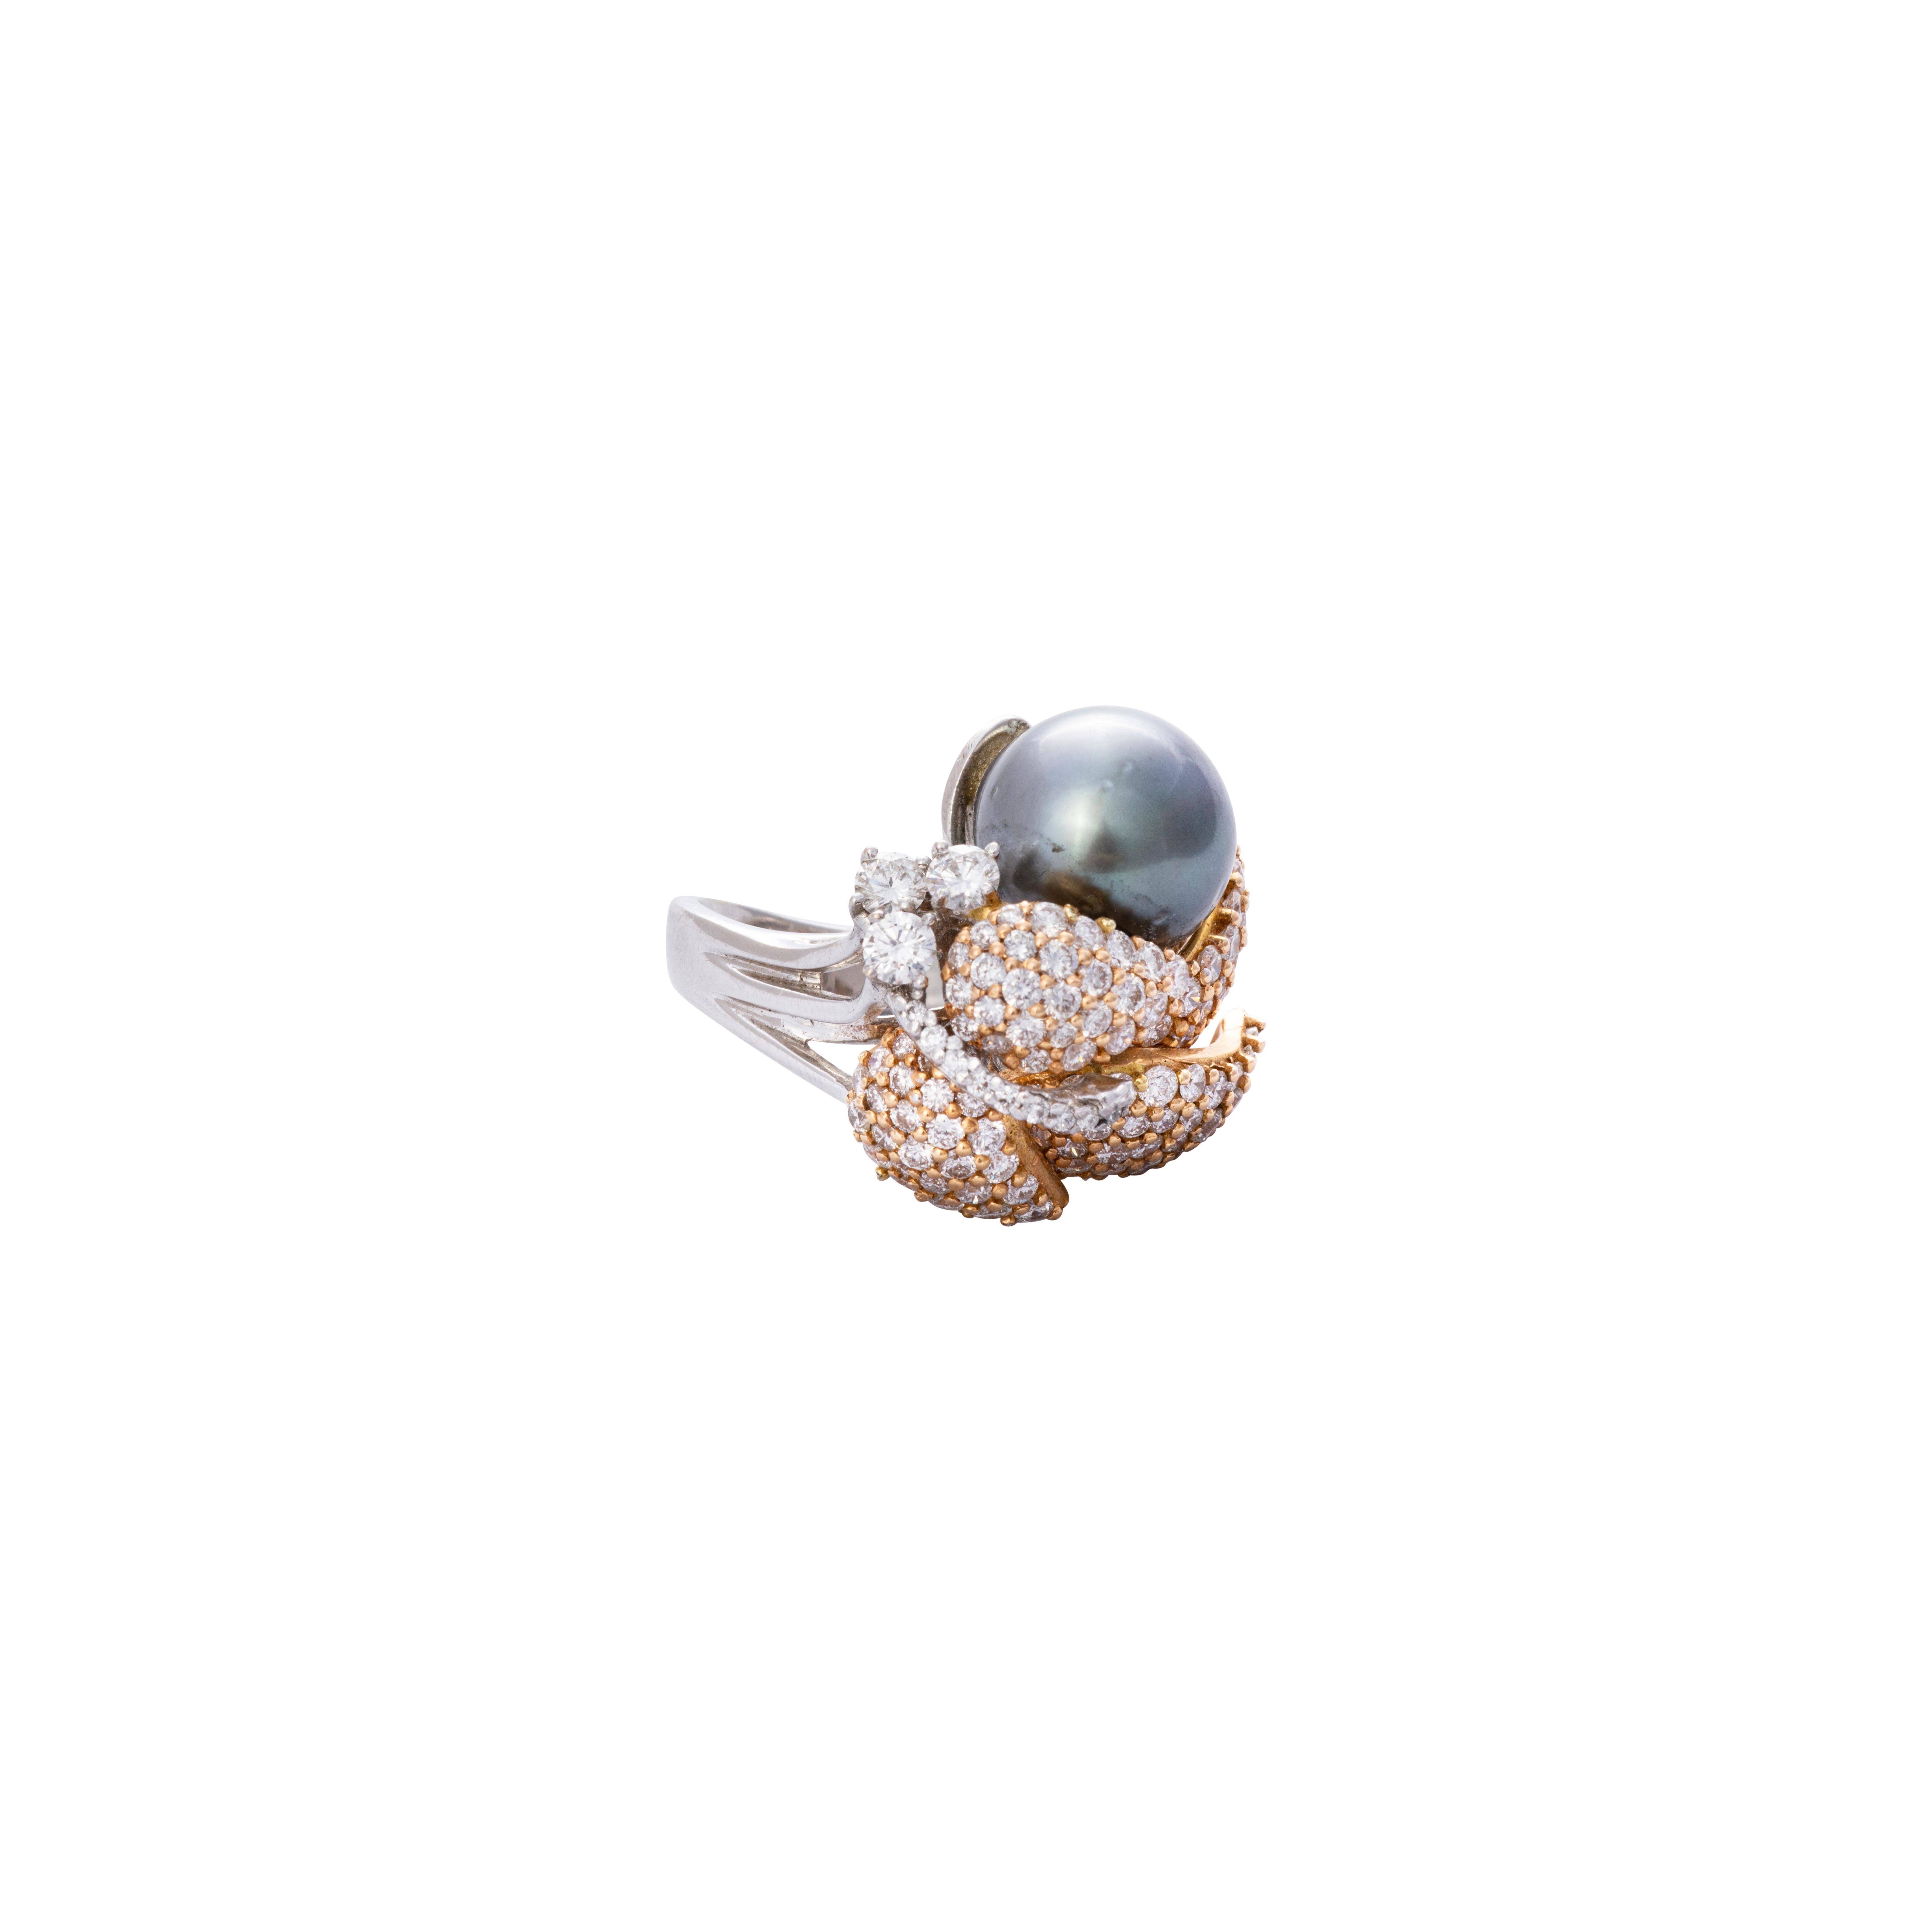 18 Karat Gold South Sea Pearl Diamond Cocktail Ring.

Beautiful cocktail ring set in 18 Karat gold, studded with white diamonds & a gorgeous south sea pearl. Ideal for evening wear.

We provide an IGI diamond report for the ring.

18 karat gold -